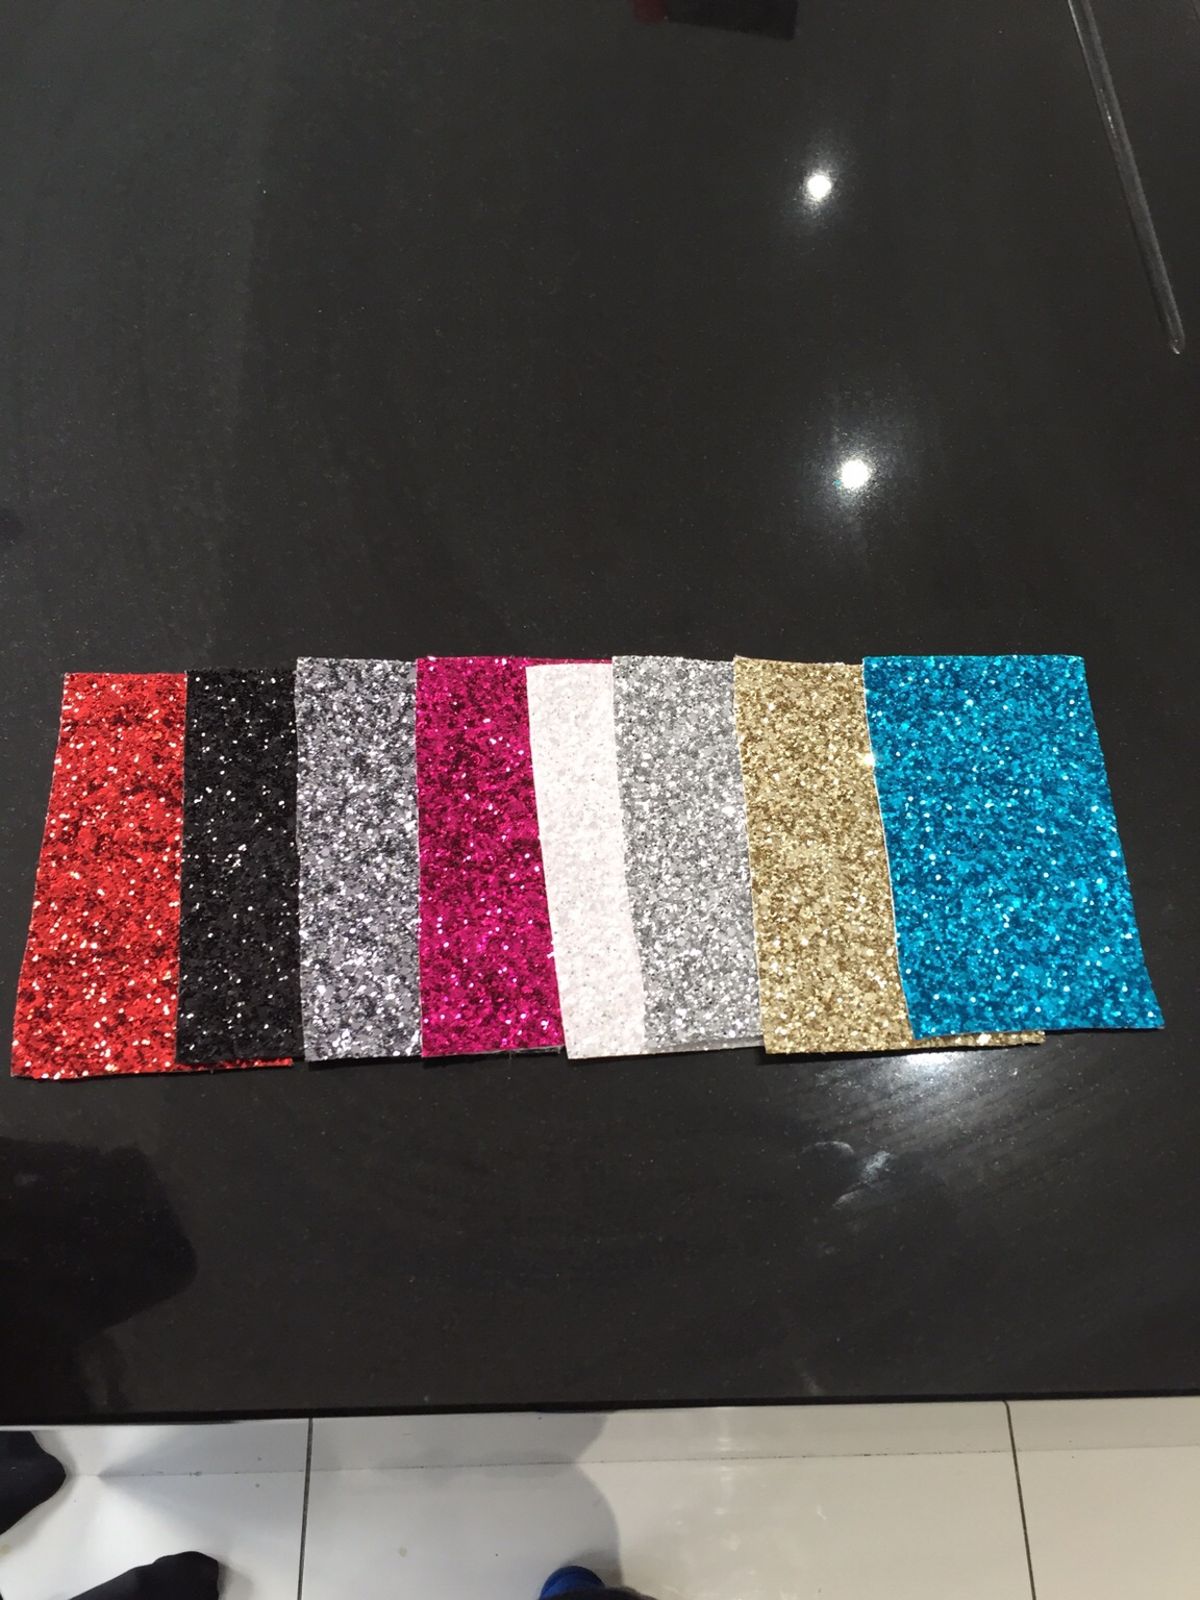 Envelope Size Samples Of Glitter Fabric Wallpaper Available - Woven Fabric - HD Wallpaper 